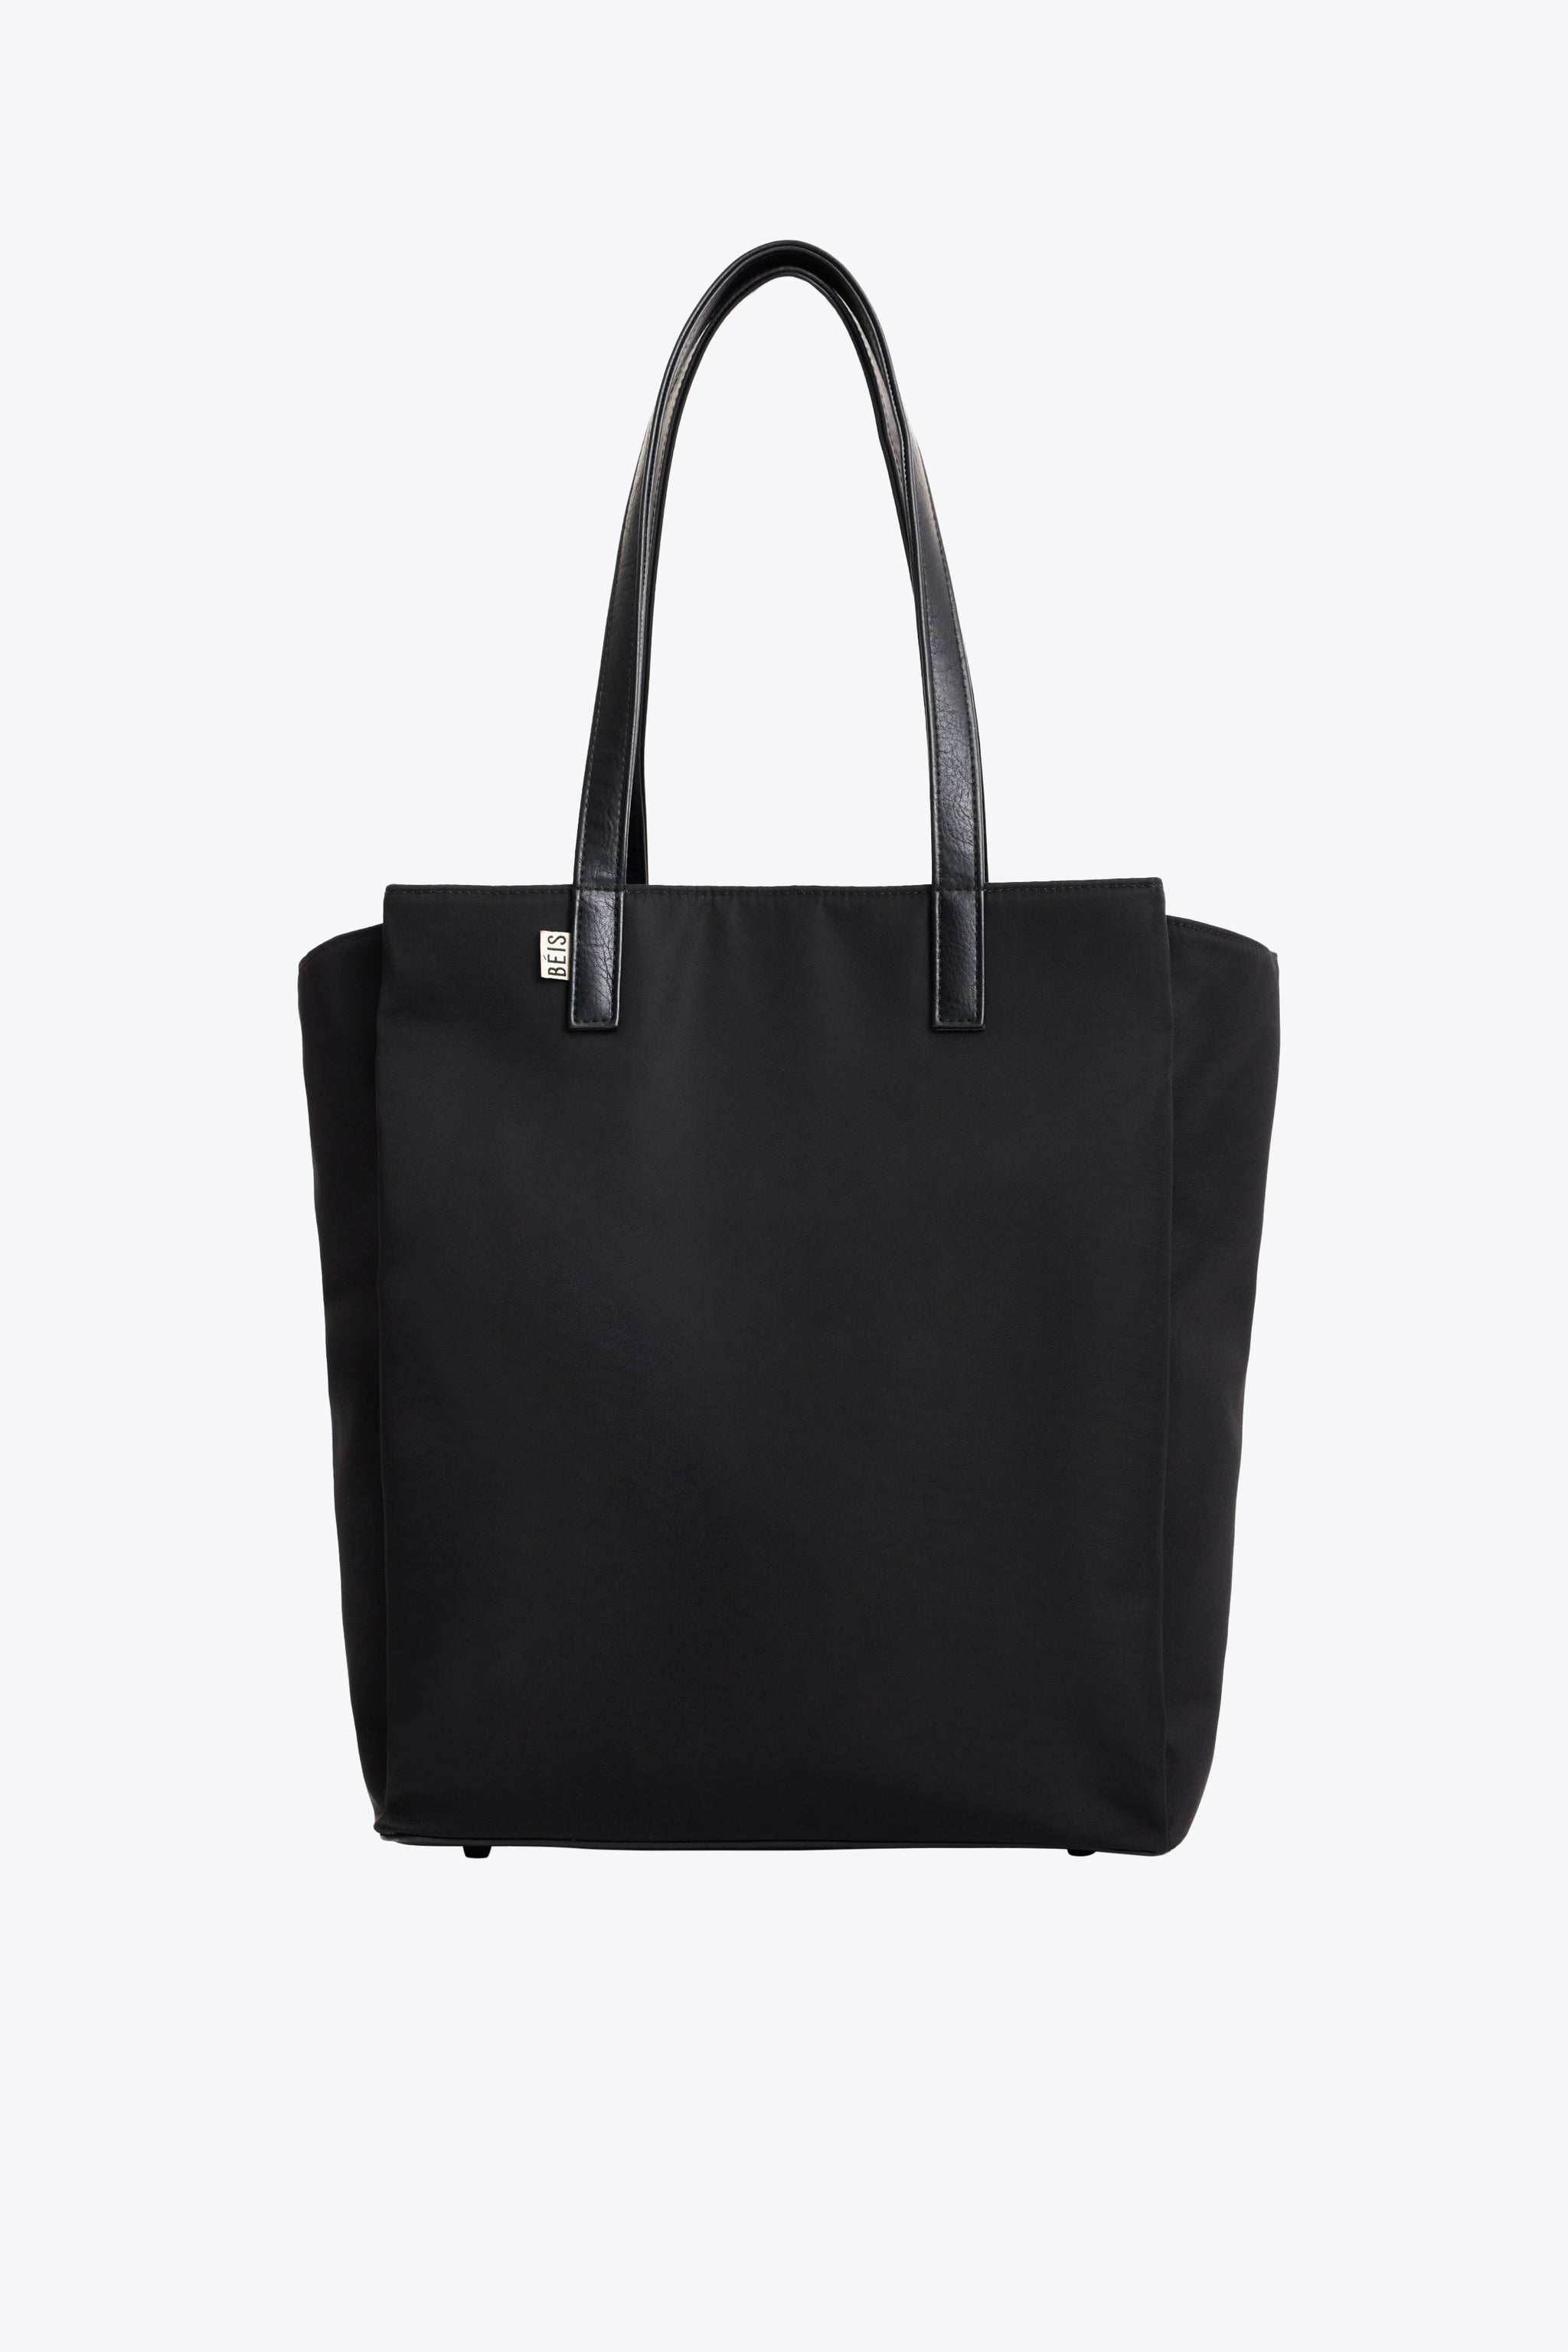 Béis 'The Commuter Tote' In Black - Black Commuter Tote For Work & Travel